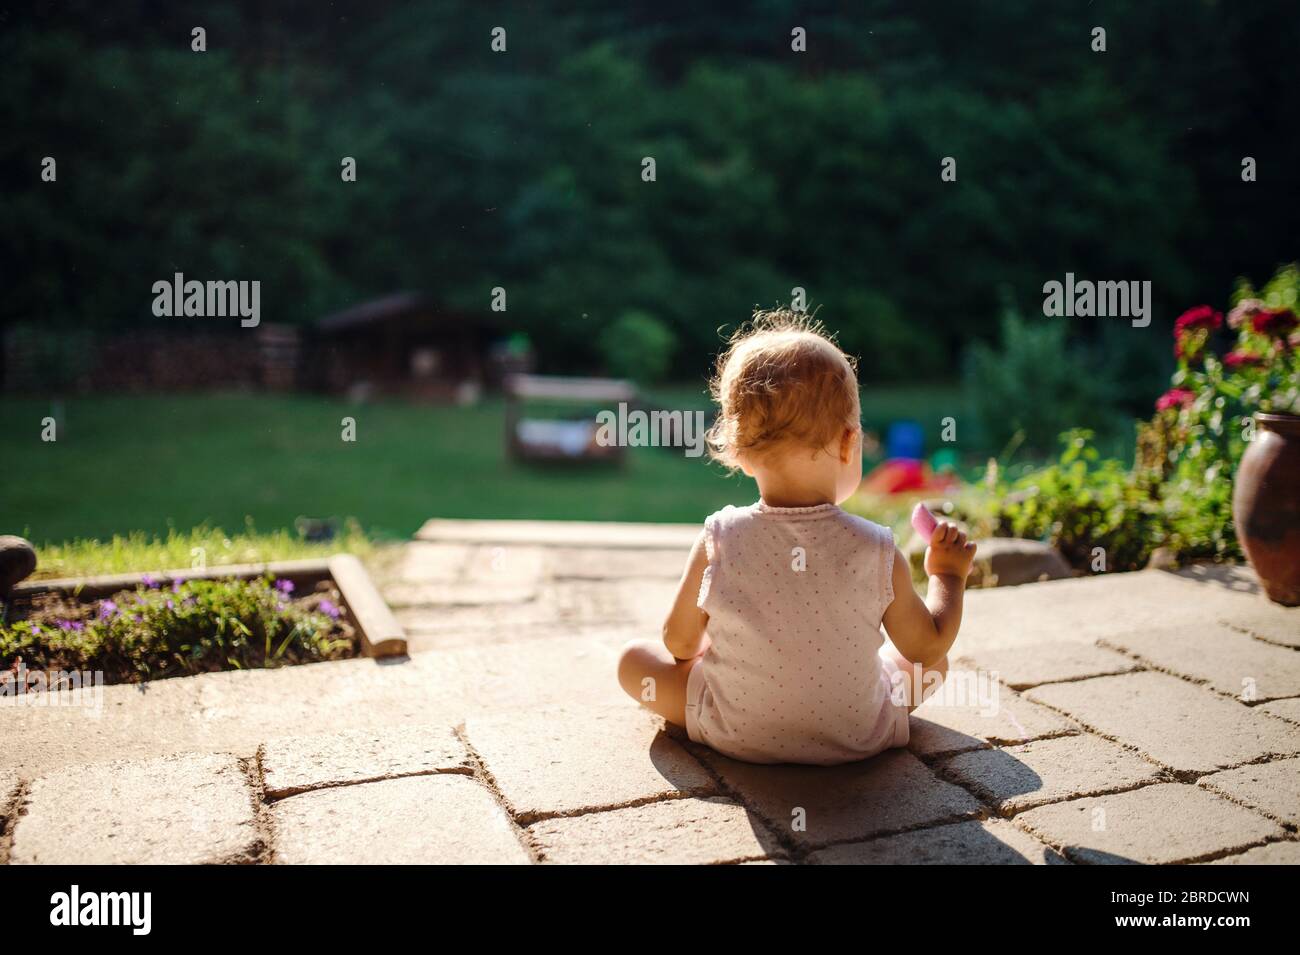 A rear view of toddler girl sitting outdoors on patio in summer. Stock Photo